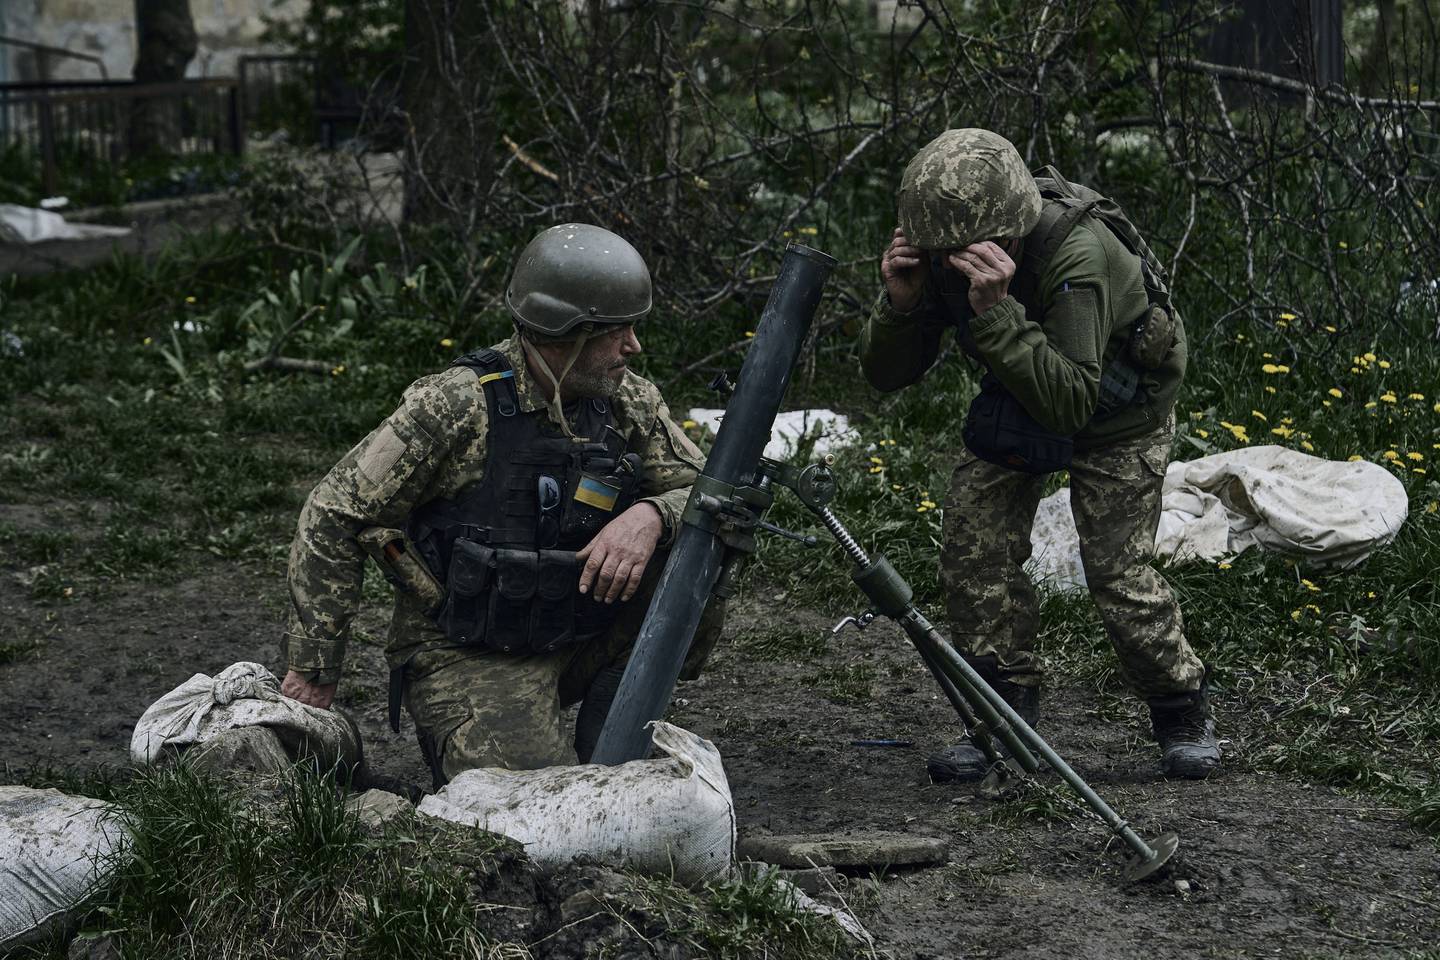 Ukrainian soldiers prepare to fire on the frontline near Avdiivka, an eastern city where fierce battles against Russian forces have been taking place, in the Donetsk region, Ukraine, Friday, April 28, 2023.